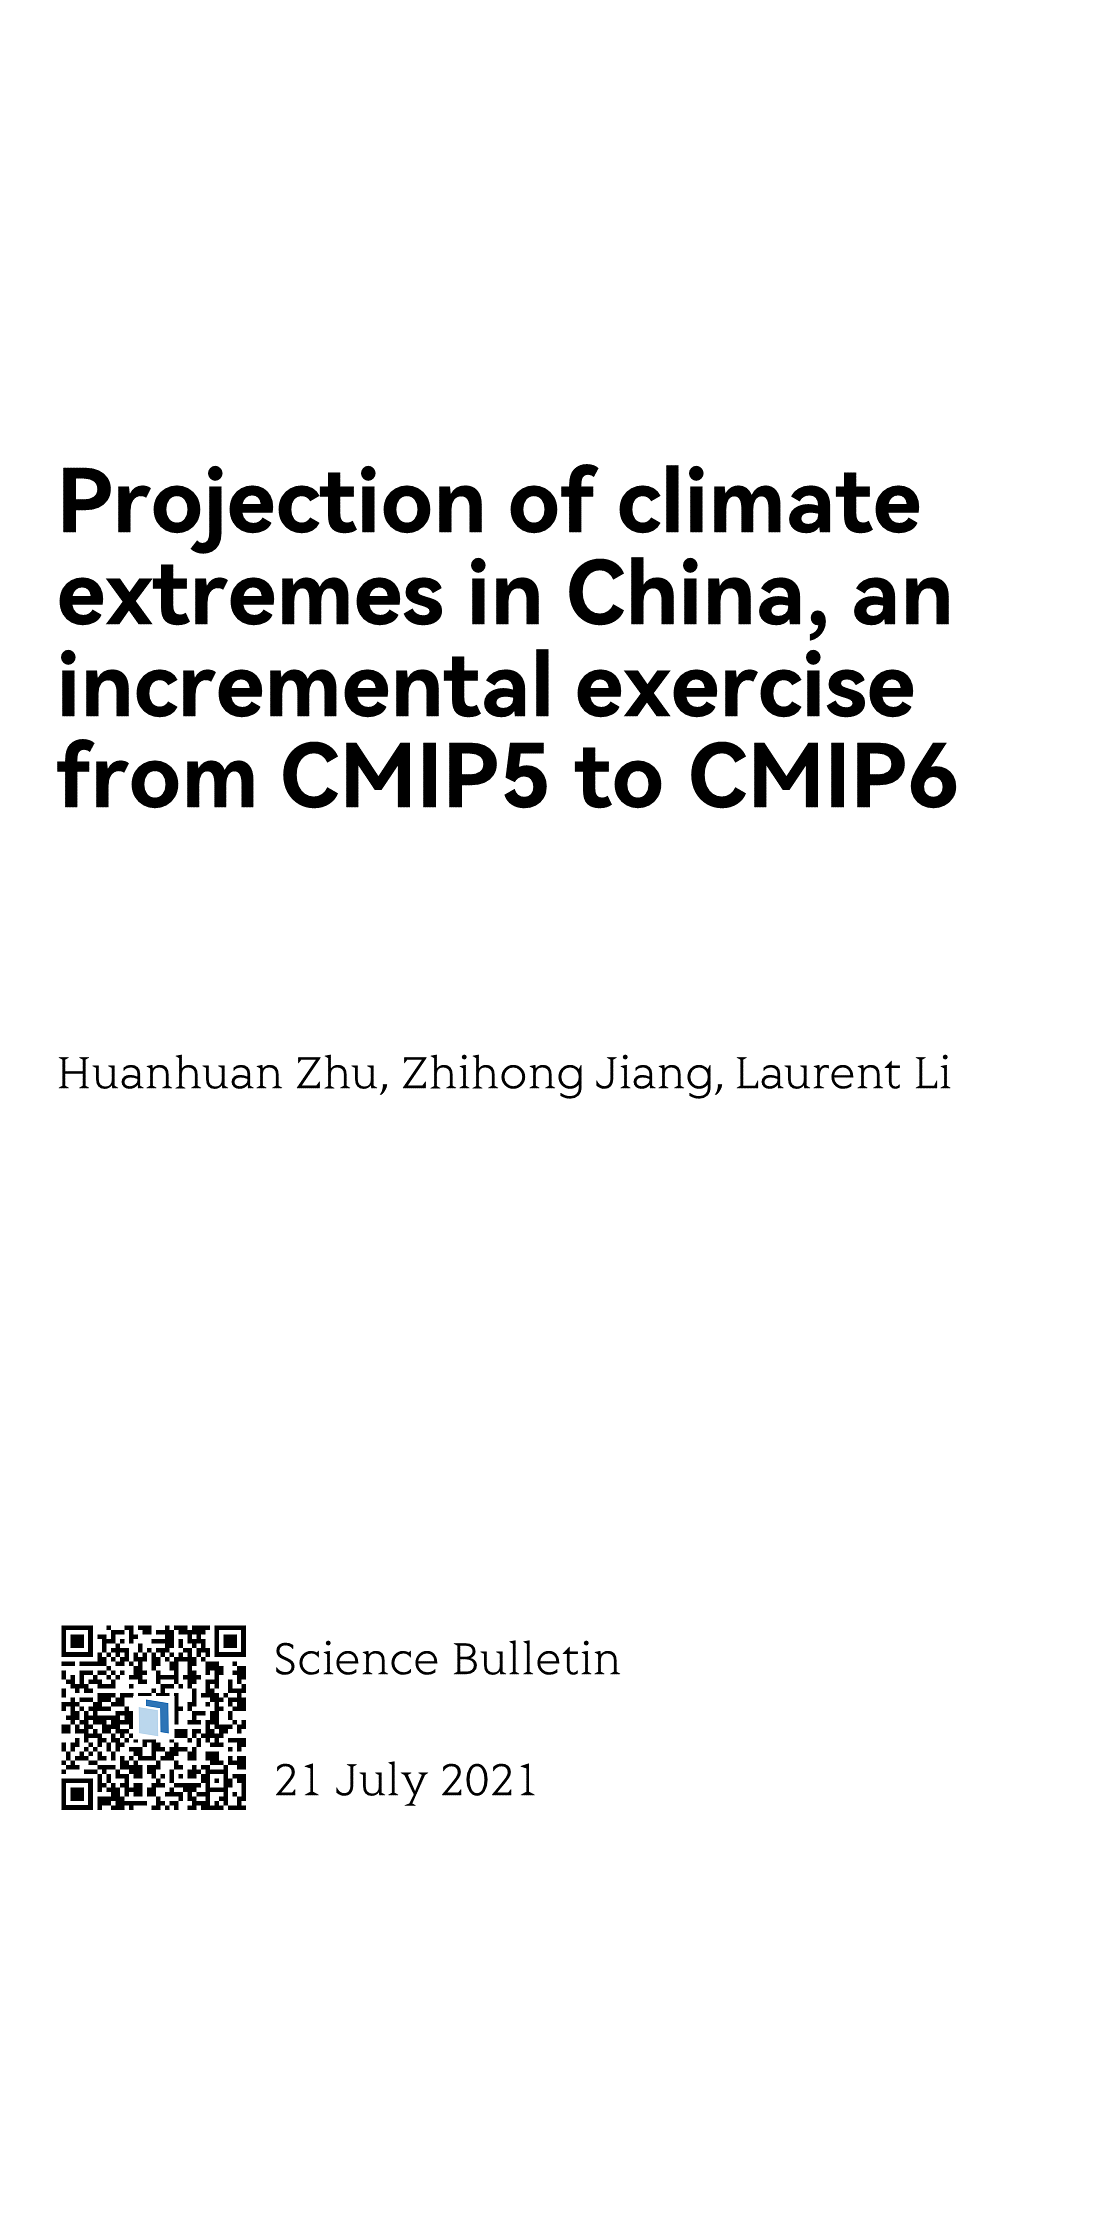 Projection of climate extremes in China, an incremental exercise from CMIP5 to CMIP6_1